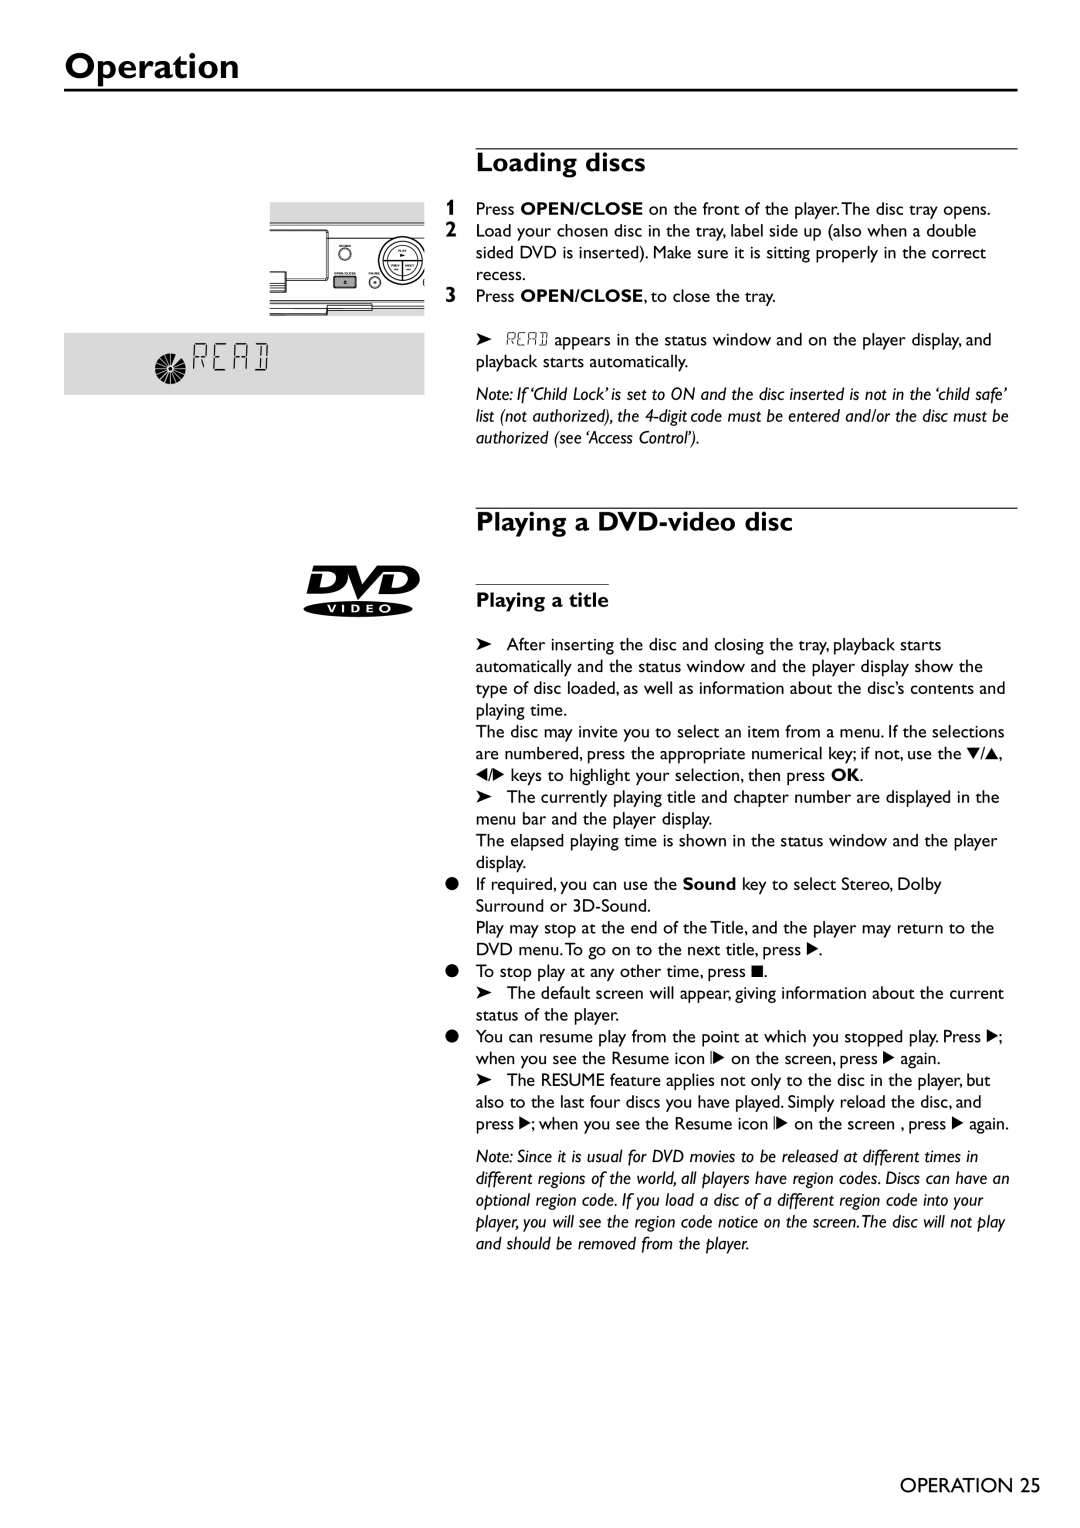 Philips DVD751 manual Operation, Loading discs, Playing a DVD-video disc 